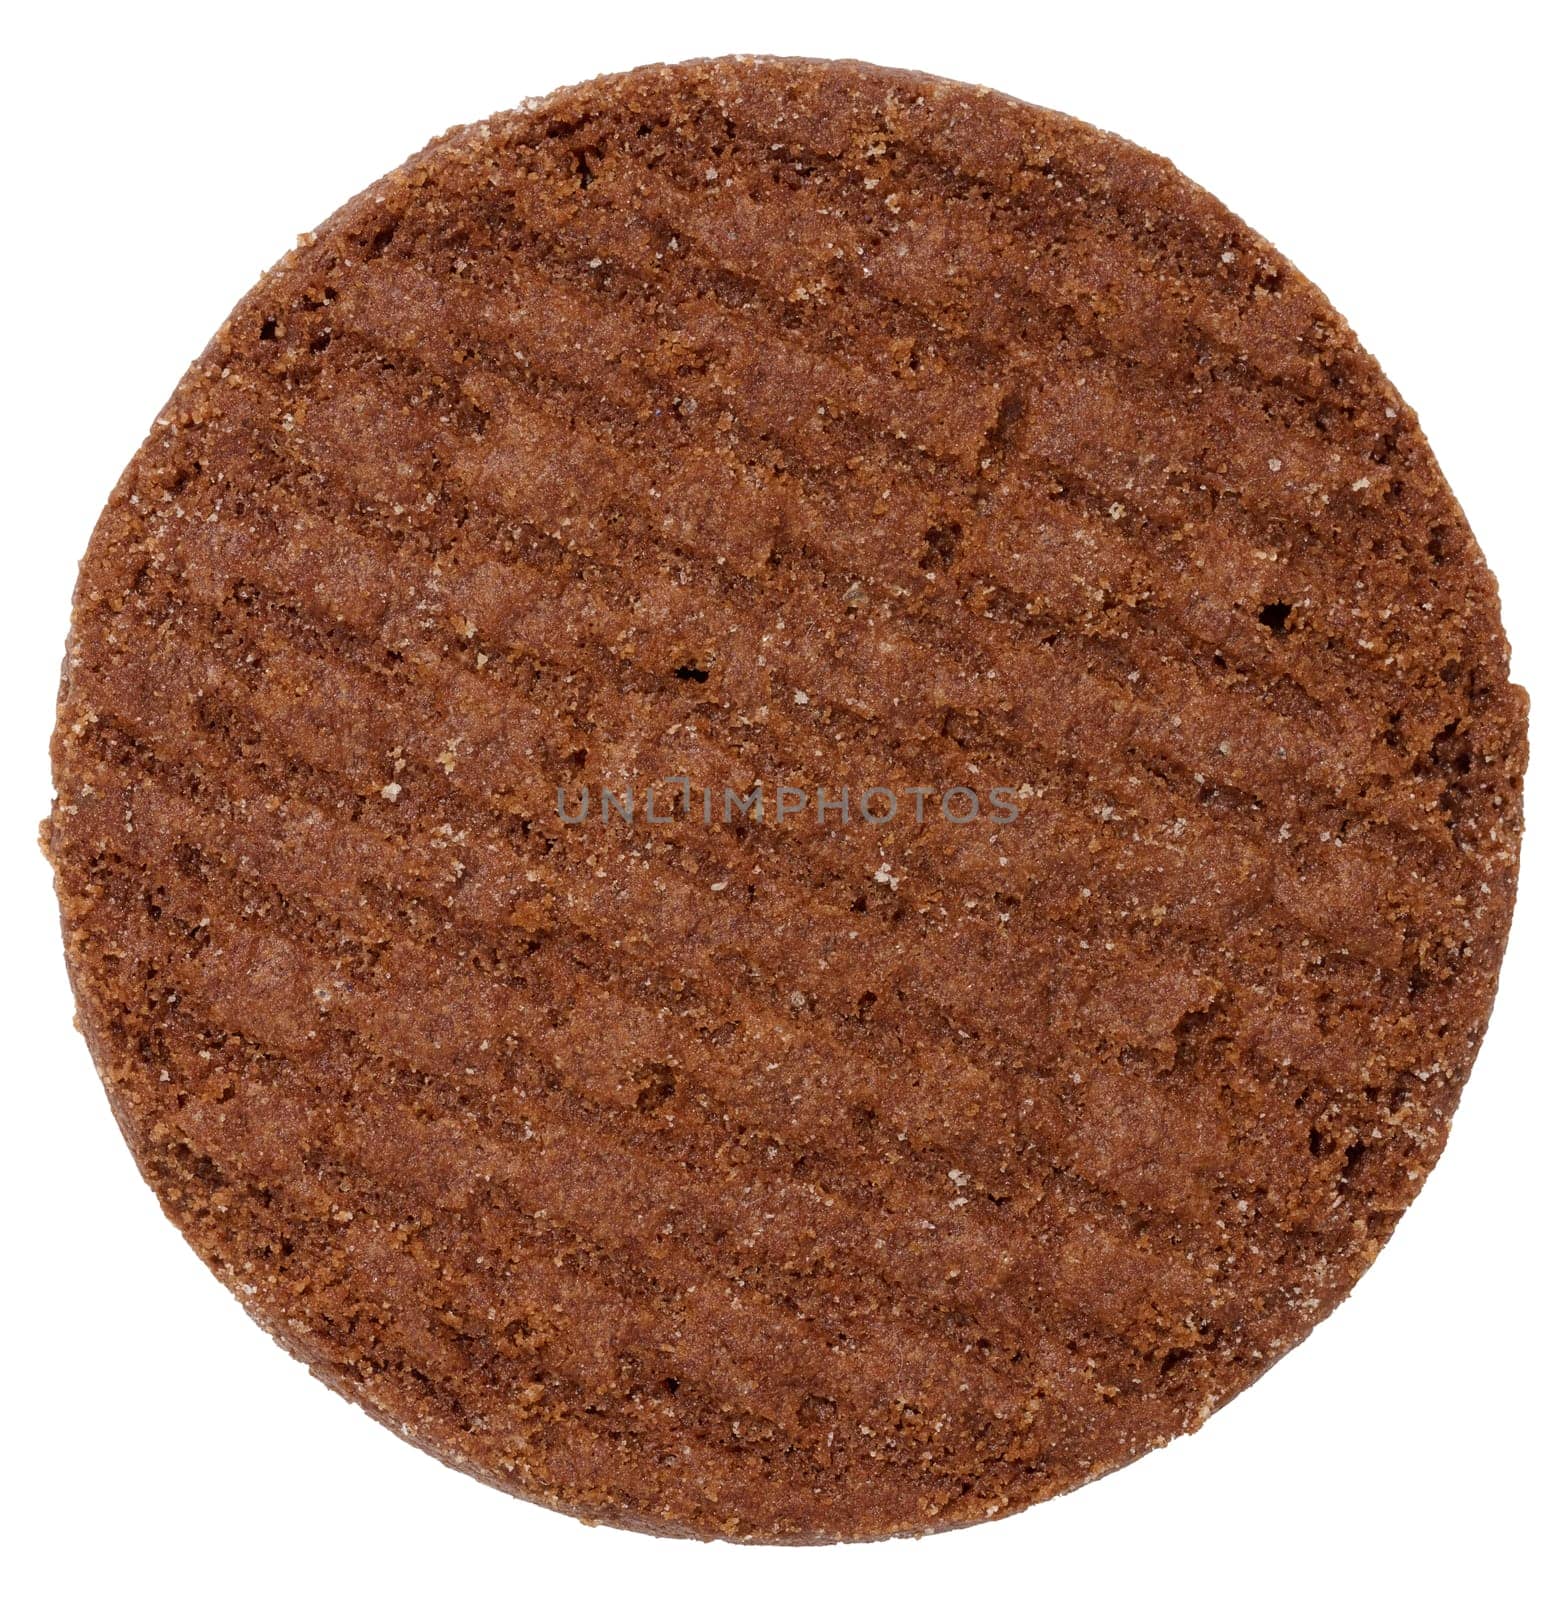 Round chocolate cookies on white isolated background